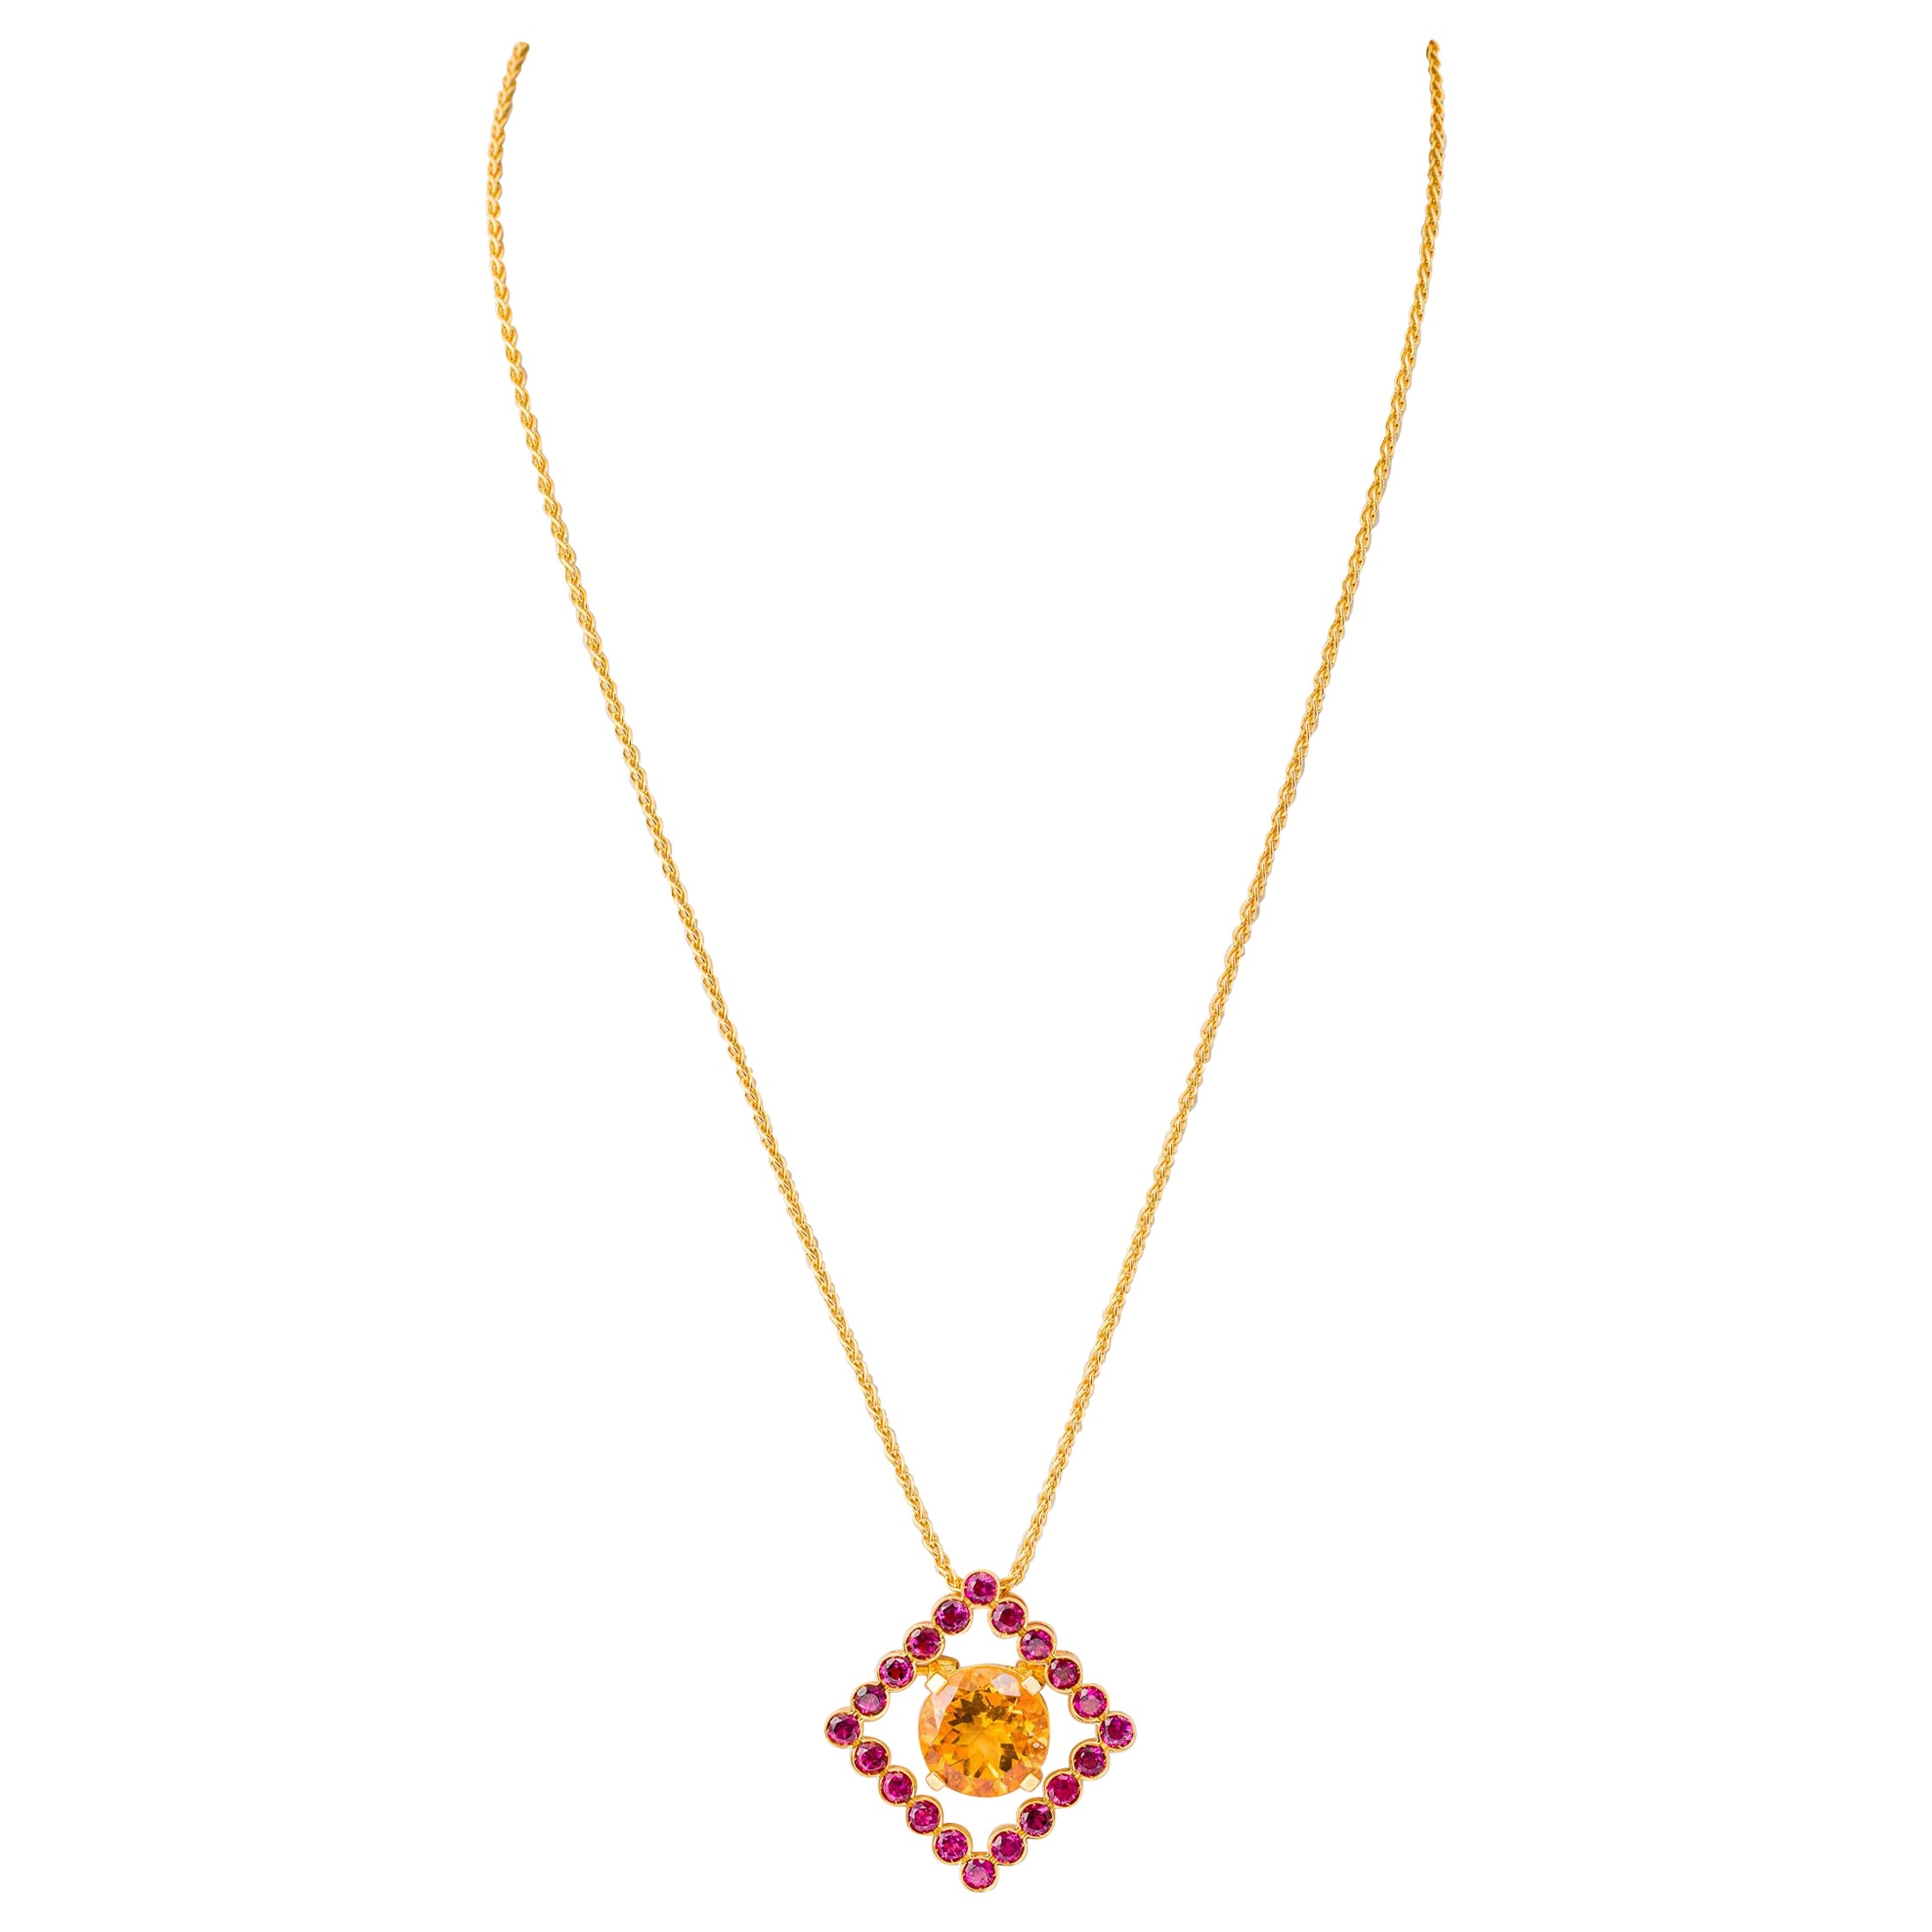 "Costis" Frame In Motion Pendant with 5.37 crts Citrine and Pink Tourmalines For Sale